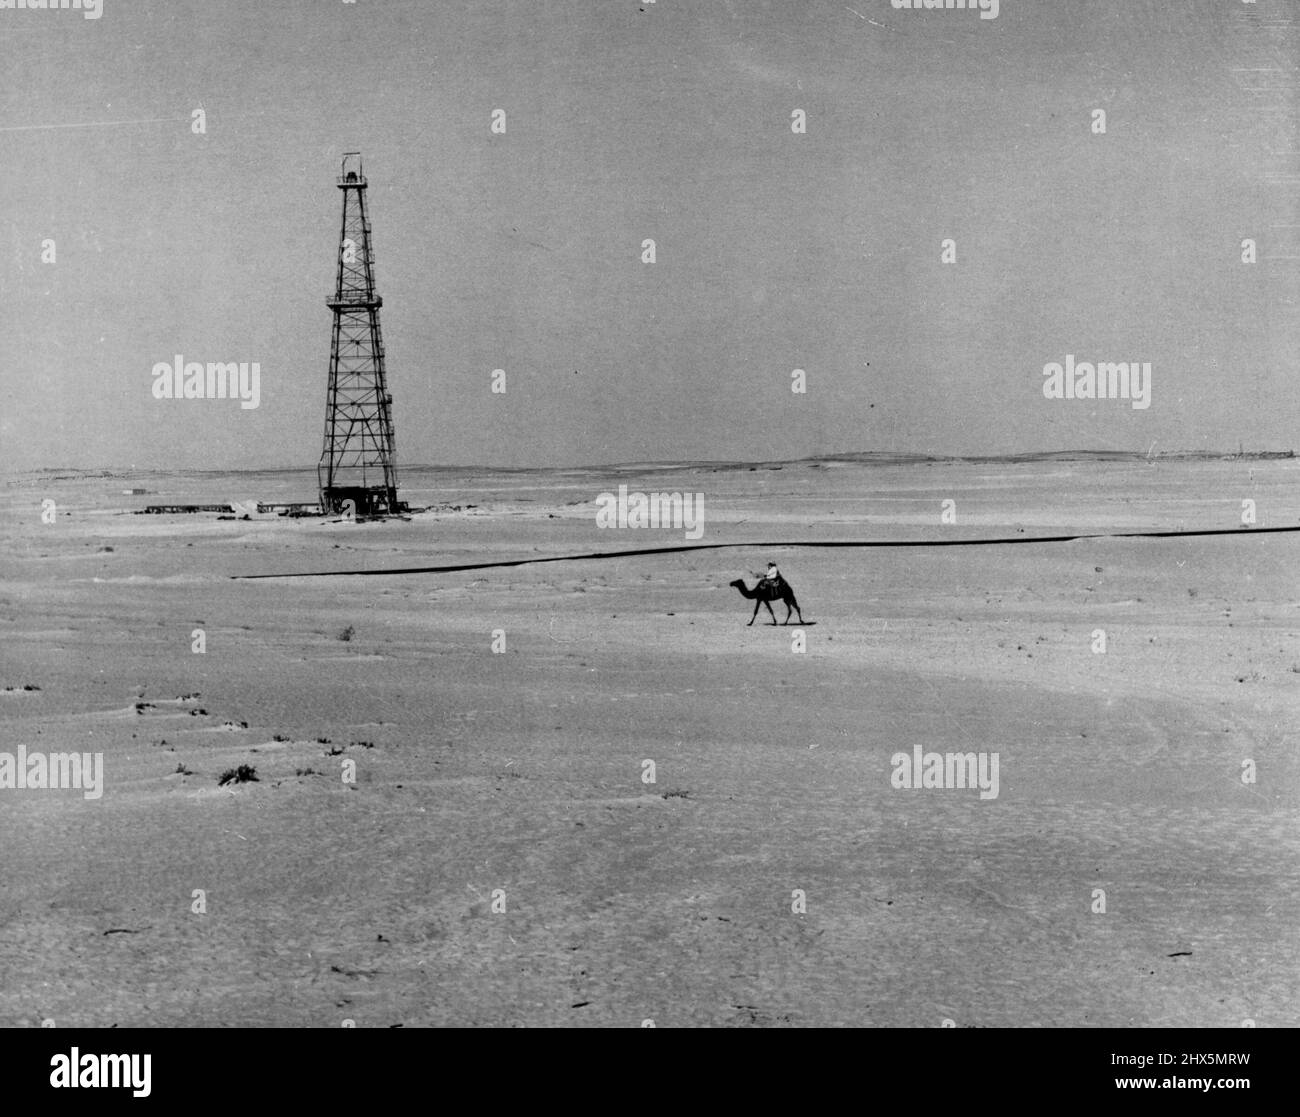 ***** Saudi Arabia...downstream development within the ***** ***** and rider, ancient ***** life, pass a modern derrick and oil ***** line in sandy wastes near Abqaiq, Saudi Arabia. Operations in Saudi Arabia ***** by the Arabian American oil Co. *****. December 14, 1955. Stock Photo